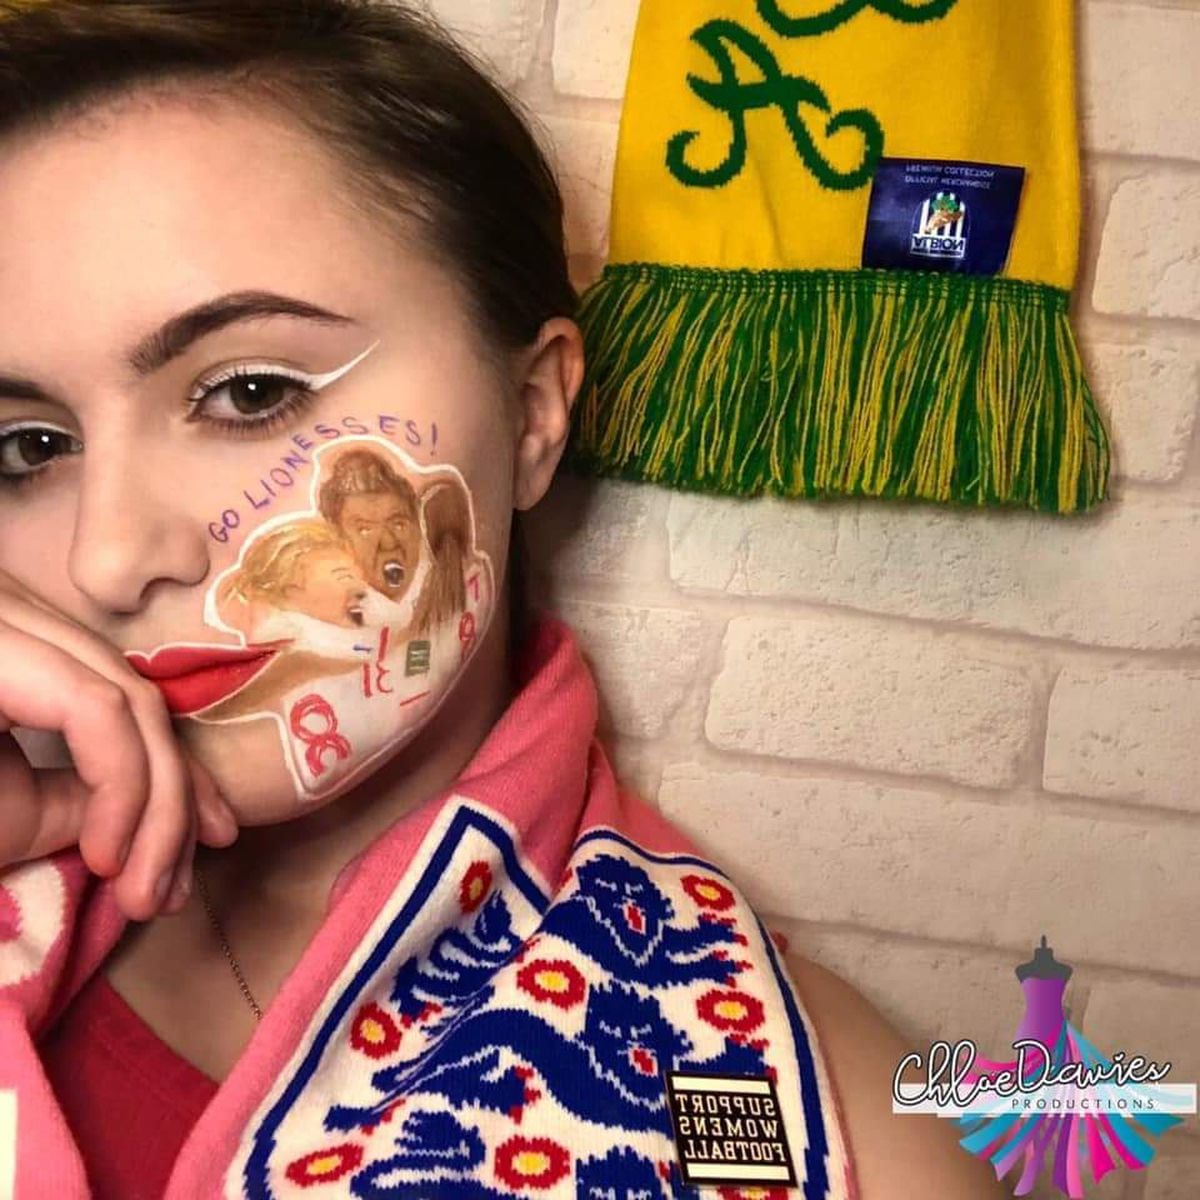 Chloe also did a design for the Women's World Cup